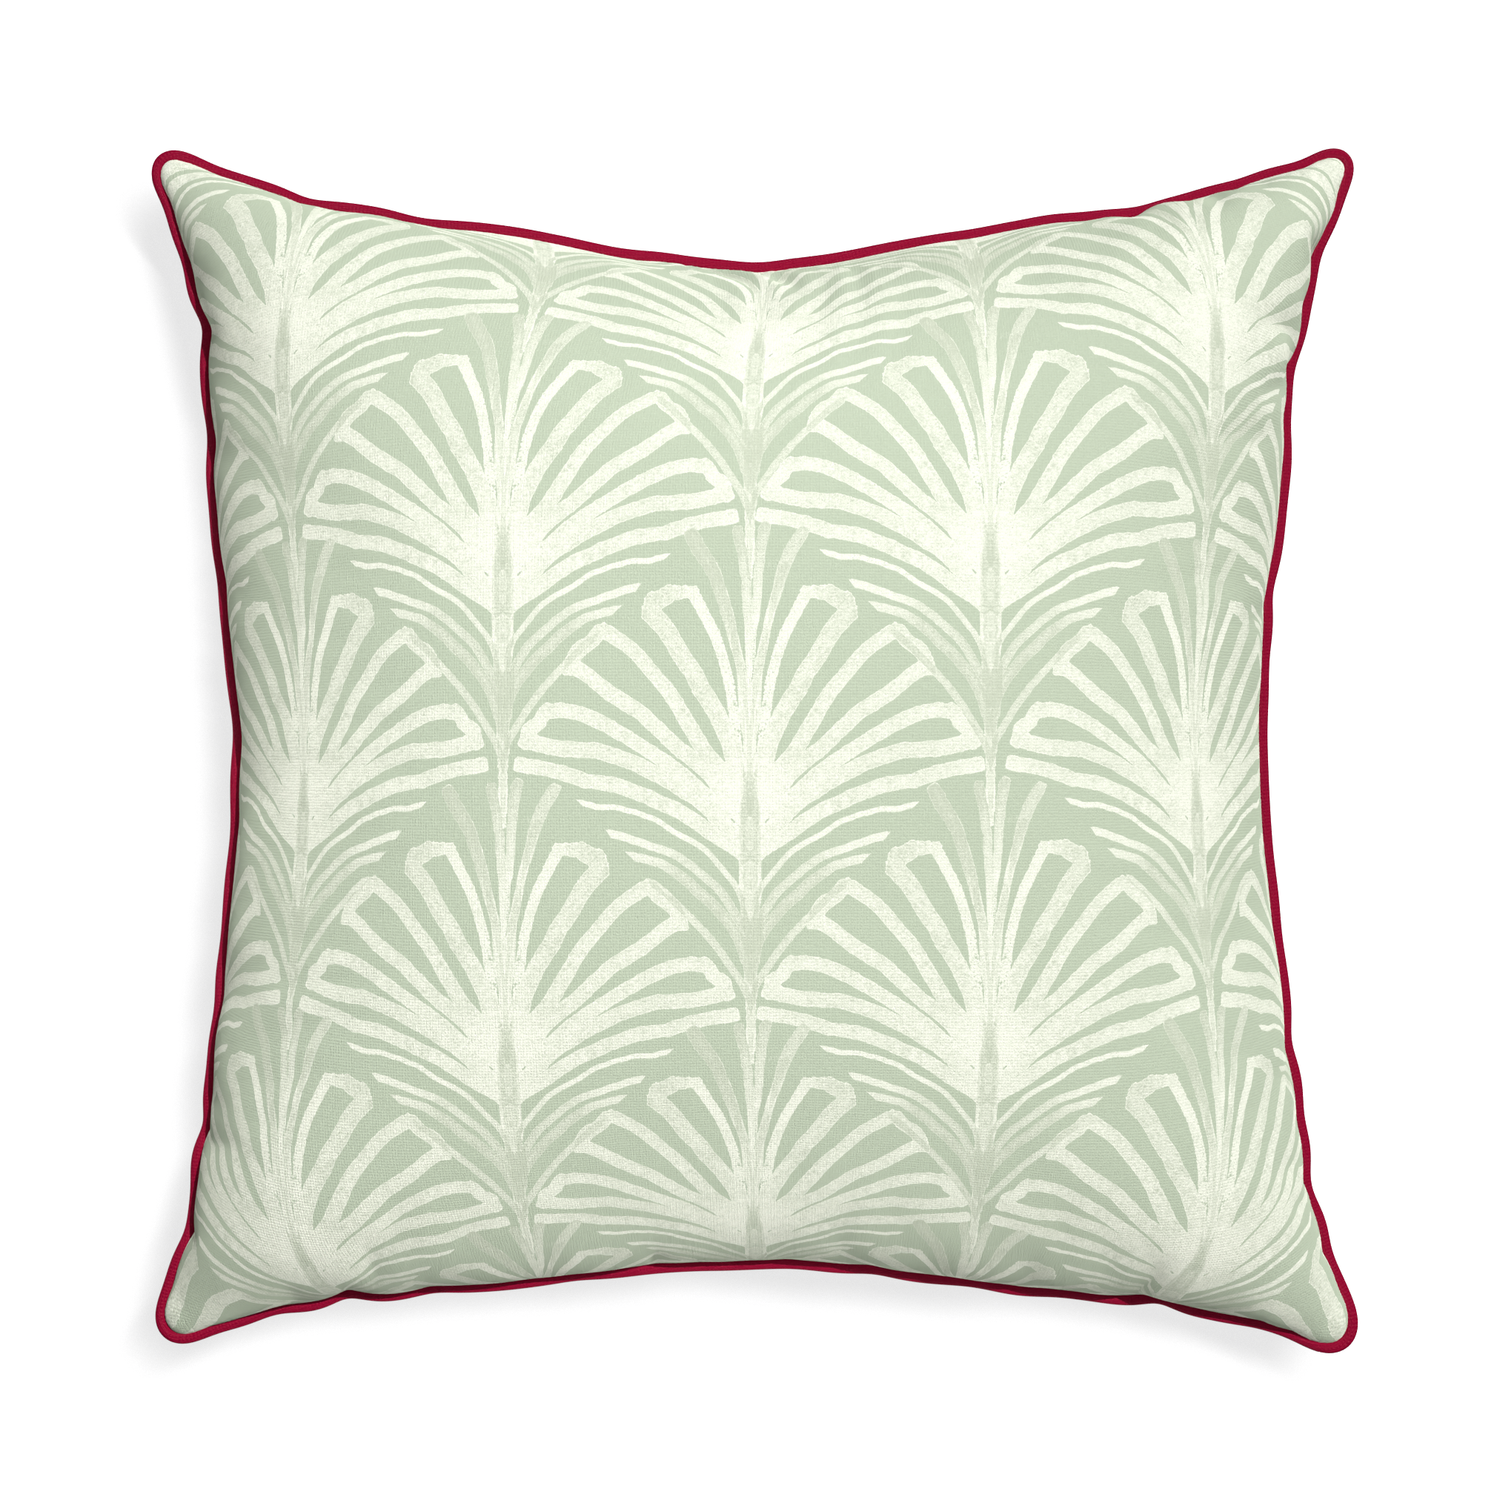 Euro-sham suzy sage custom pillow with raspberry piping on white background